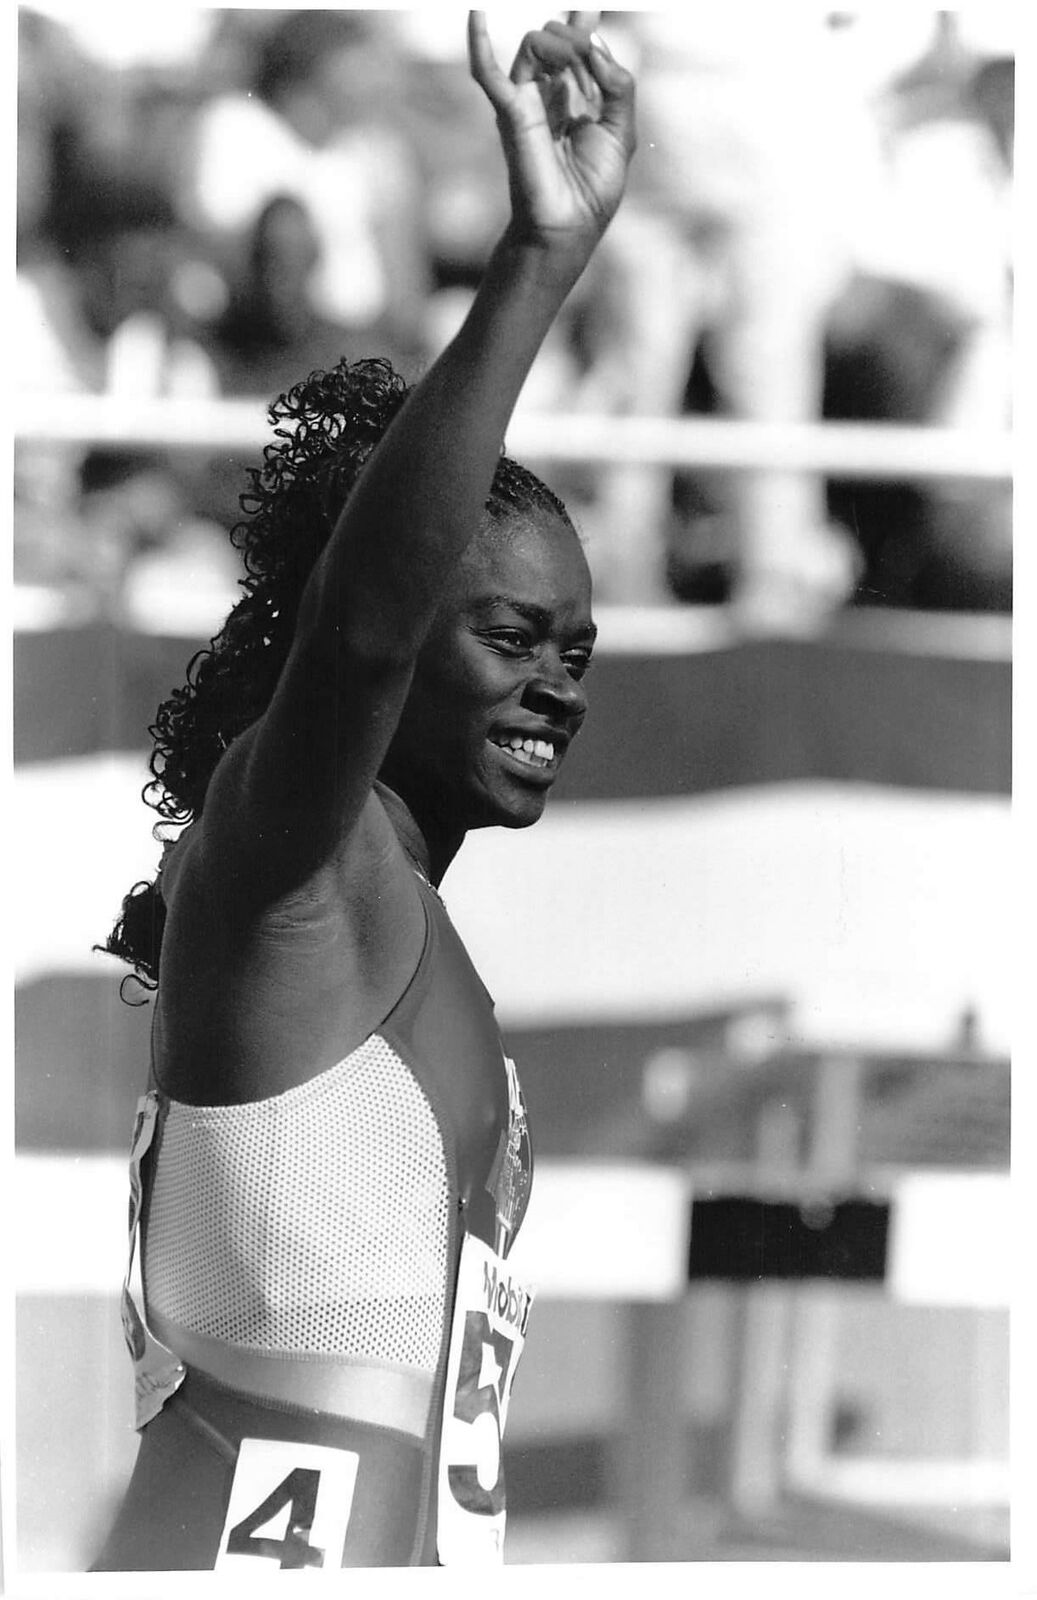 1991 Press Photo Track & Field Championships CARLETTE GUIDRY 100 meter dash NYC